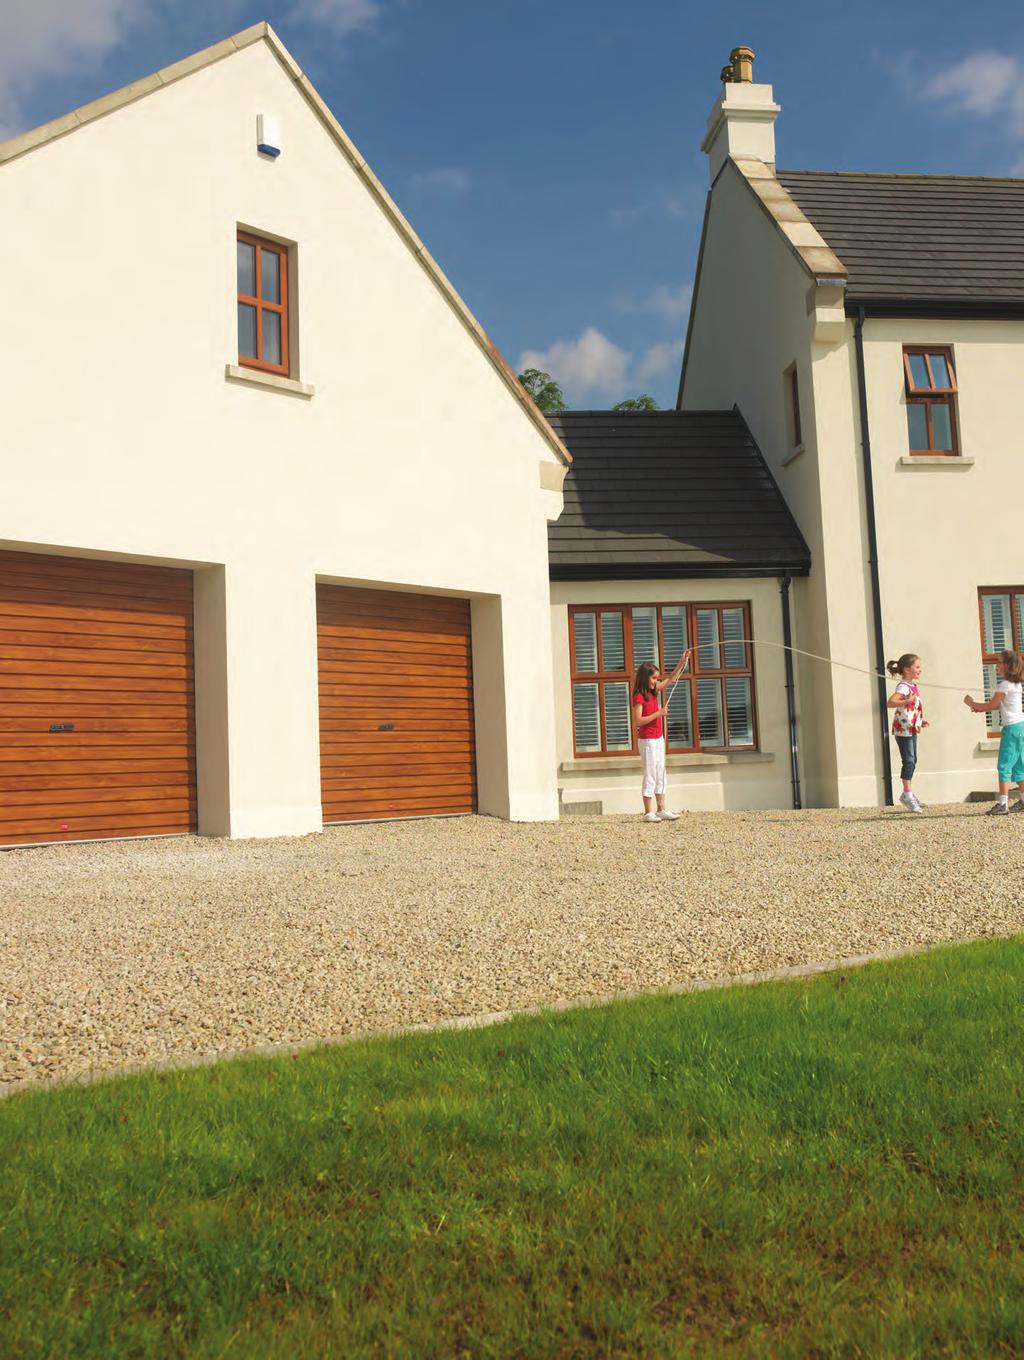 Great to come home to! Great Reasons for choosing a Garage Door Systems garage door Our Promise: The products we make are well designed, built to last and are a pleasure to use every day.